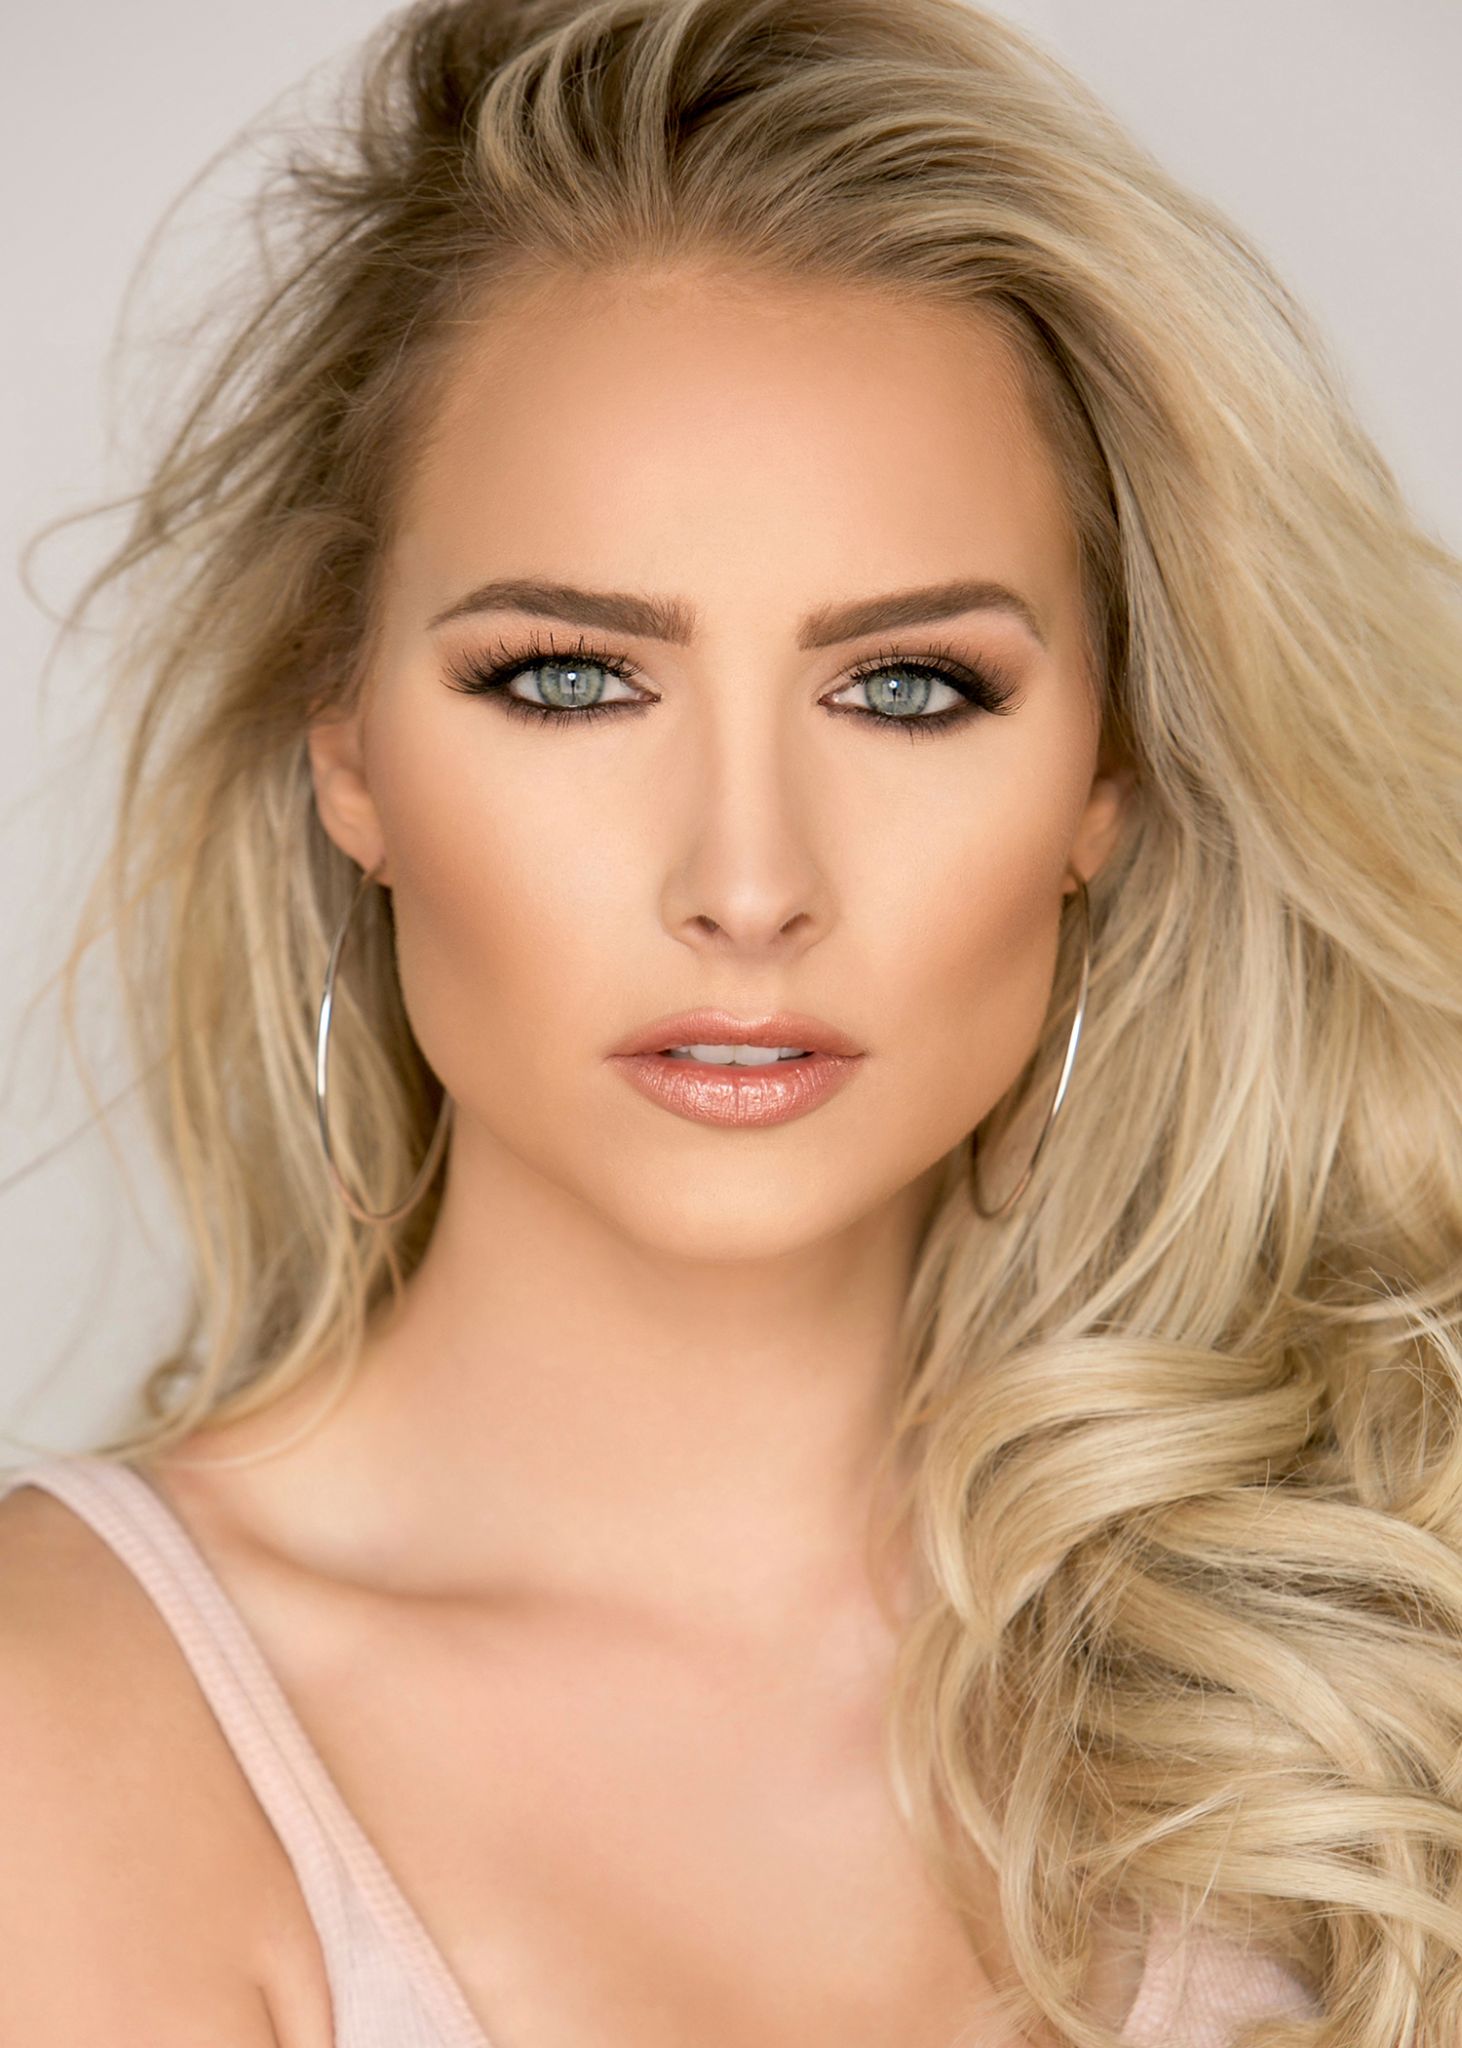 Houstonarea beauties competing in the 2019 Miss Texas USA pageant